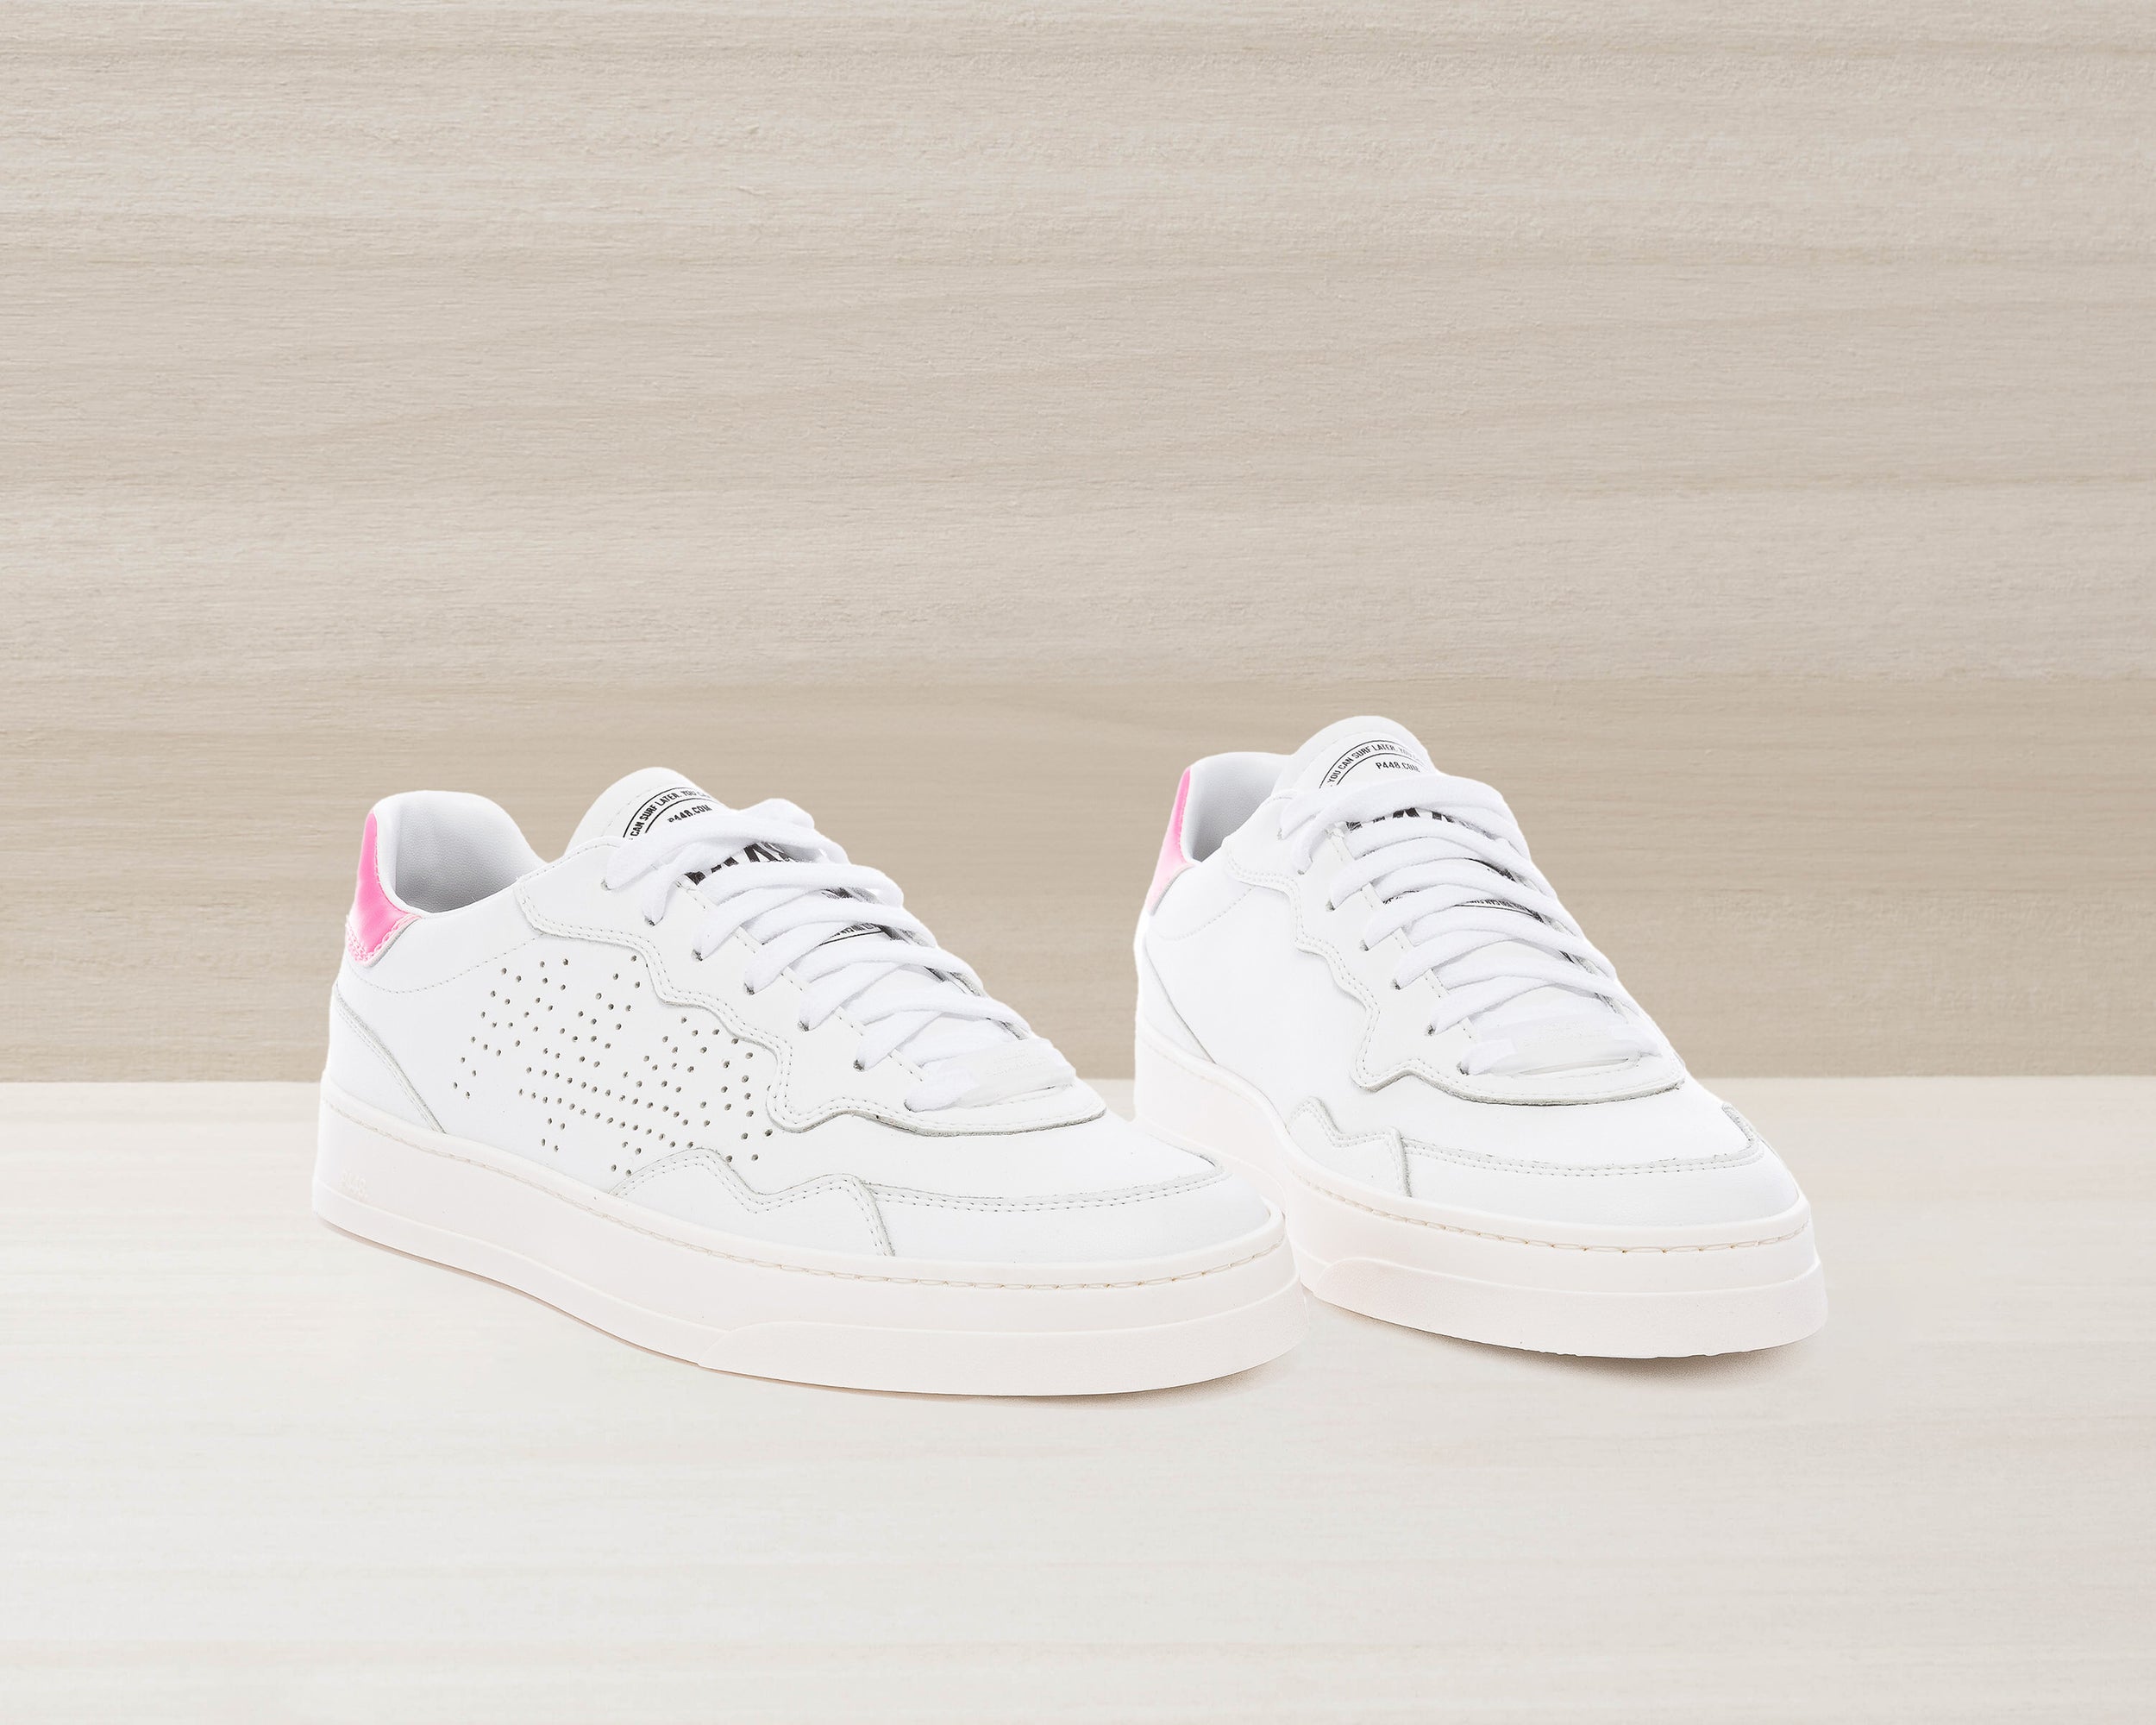 Bali Recycled White/Pink